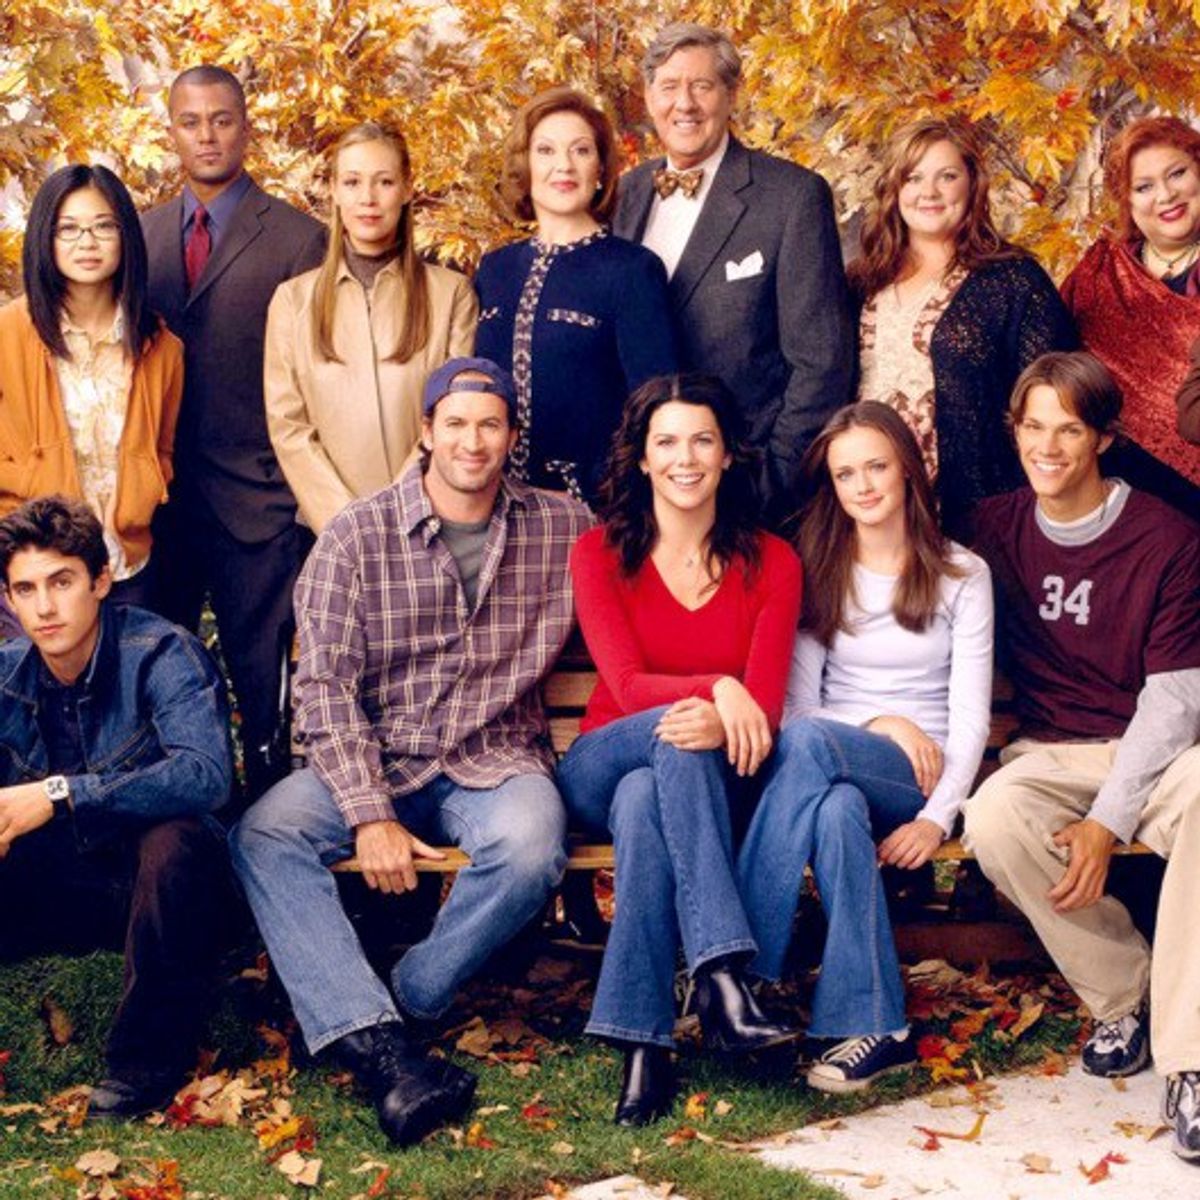 5 Things I Learned From 'Gilmore Girls'